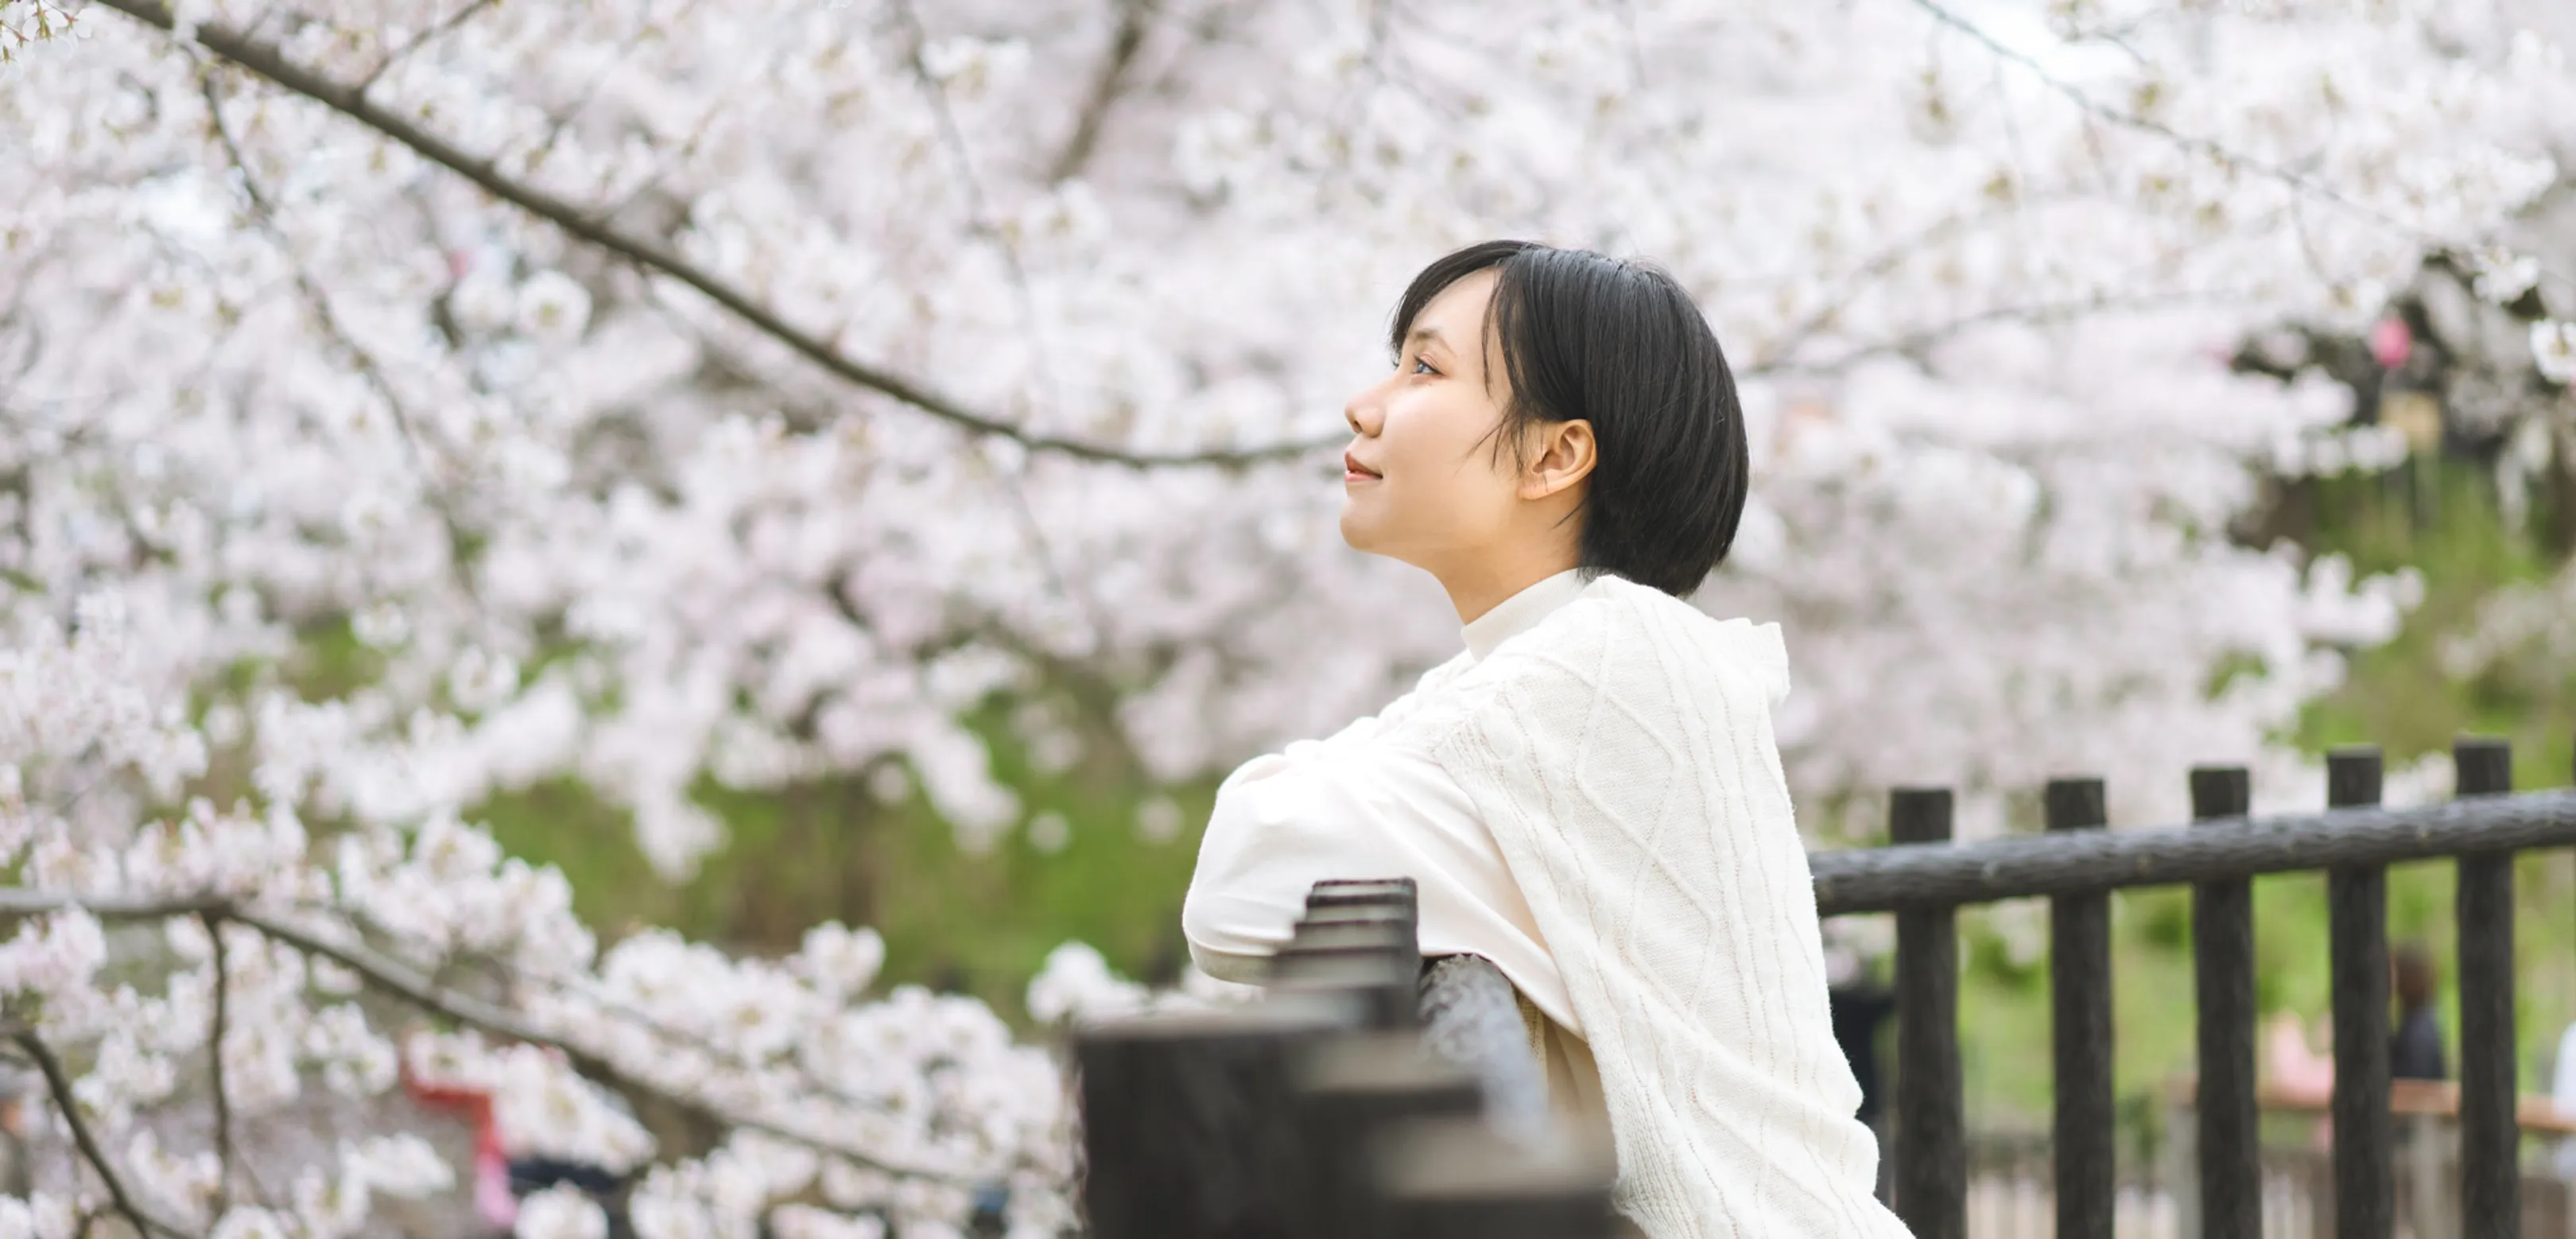 Capture your memories with a photoshoot in Tokyo